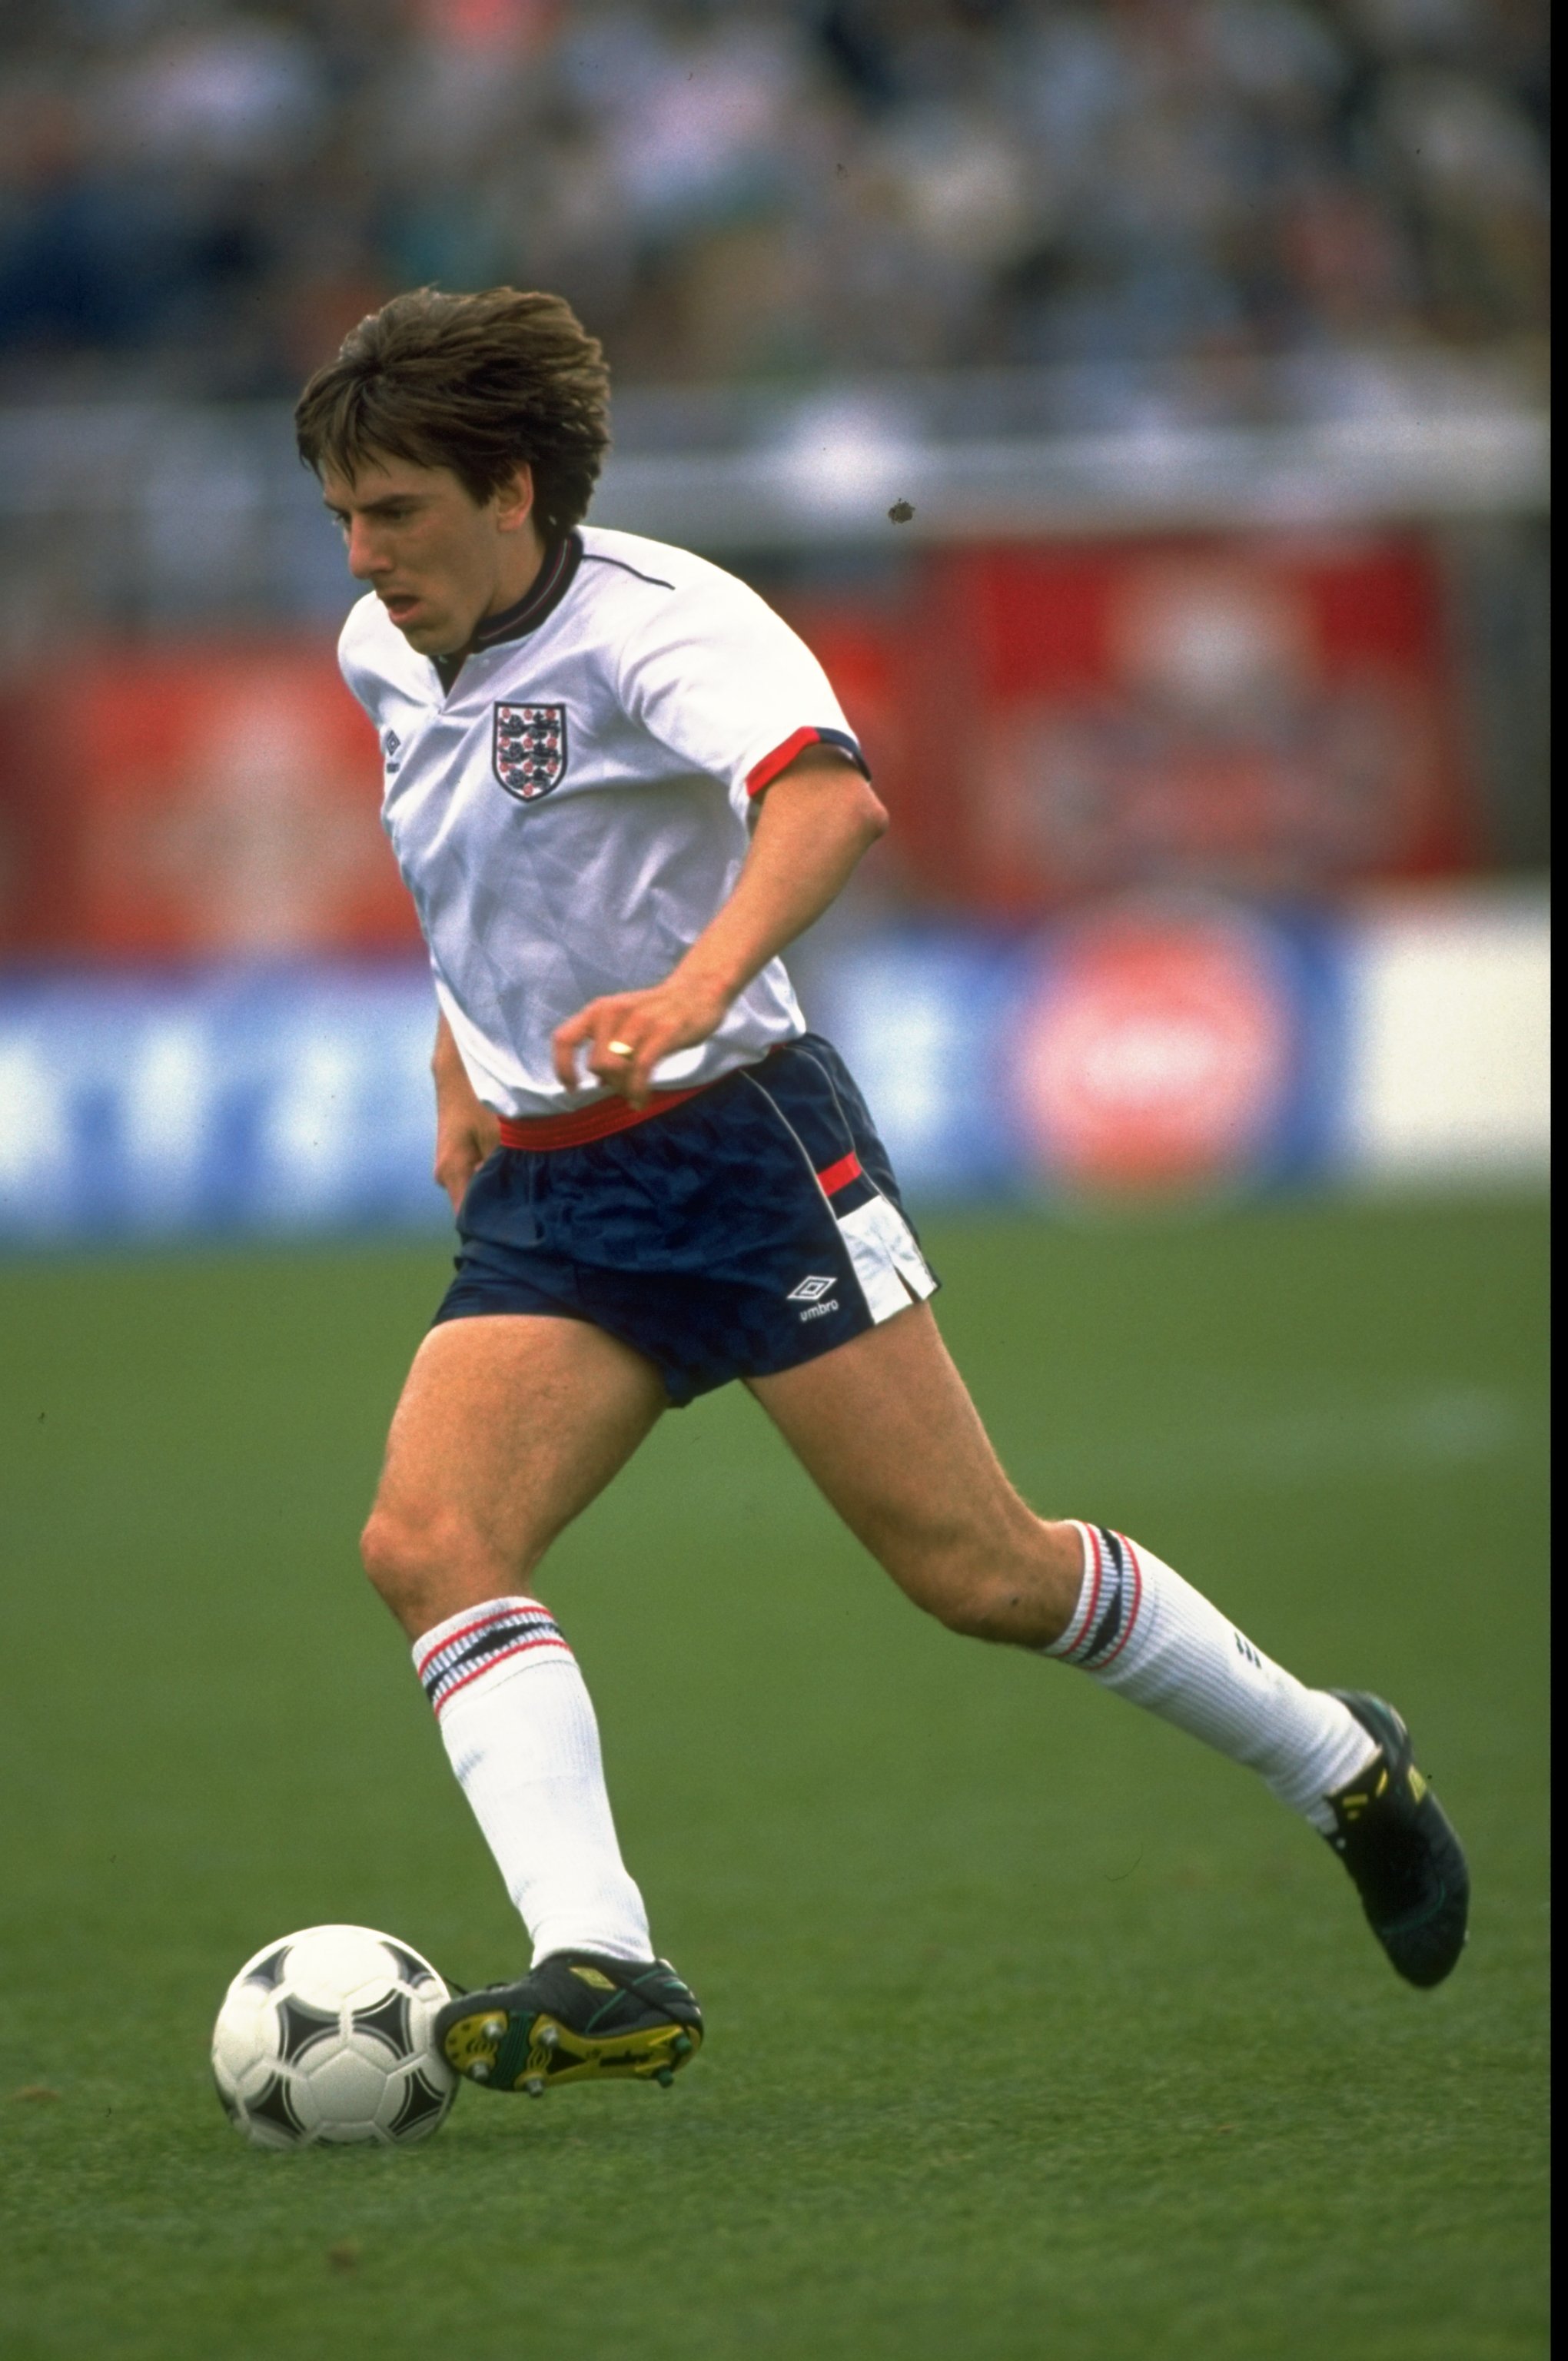 One of England's best attackers of the late 80s and early 90s, Peter Beardsley